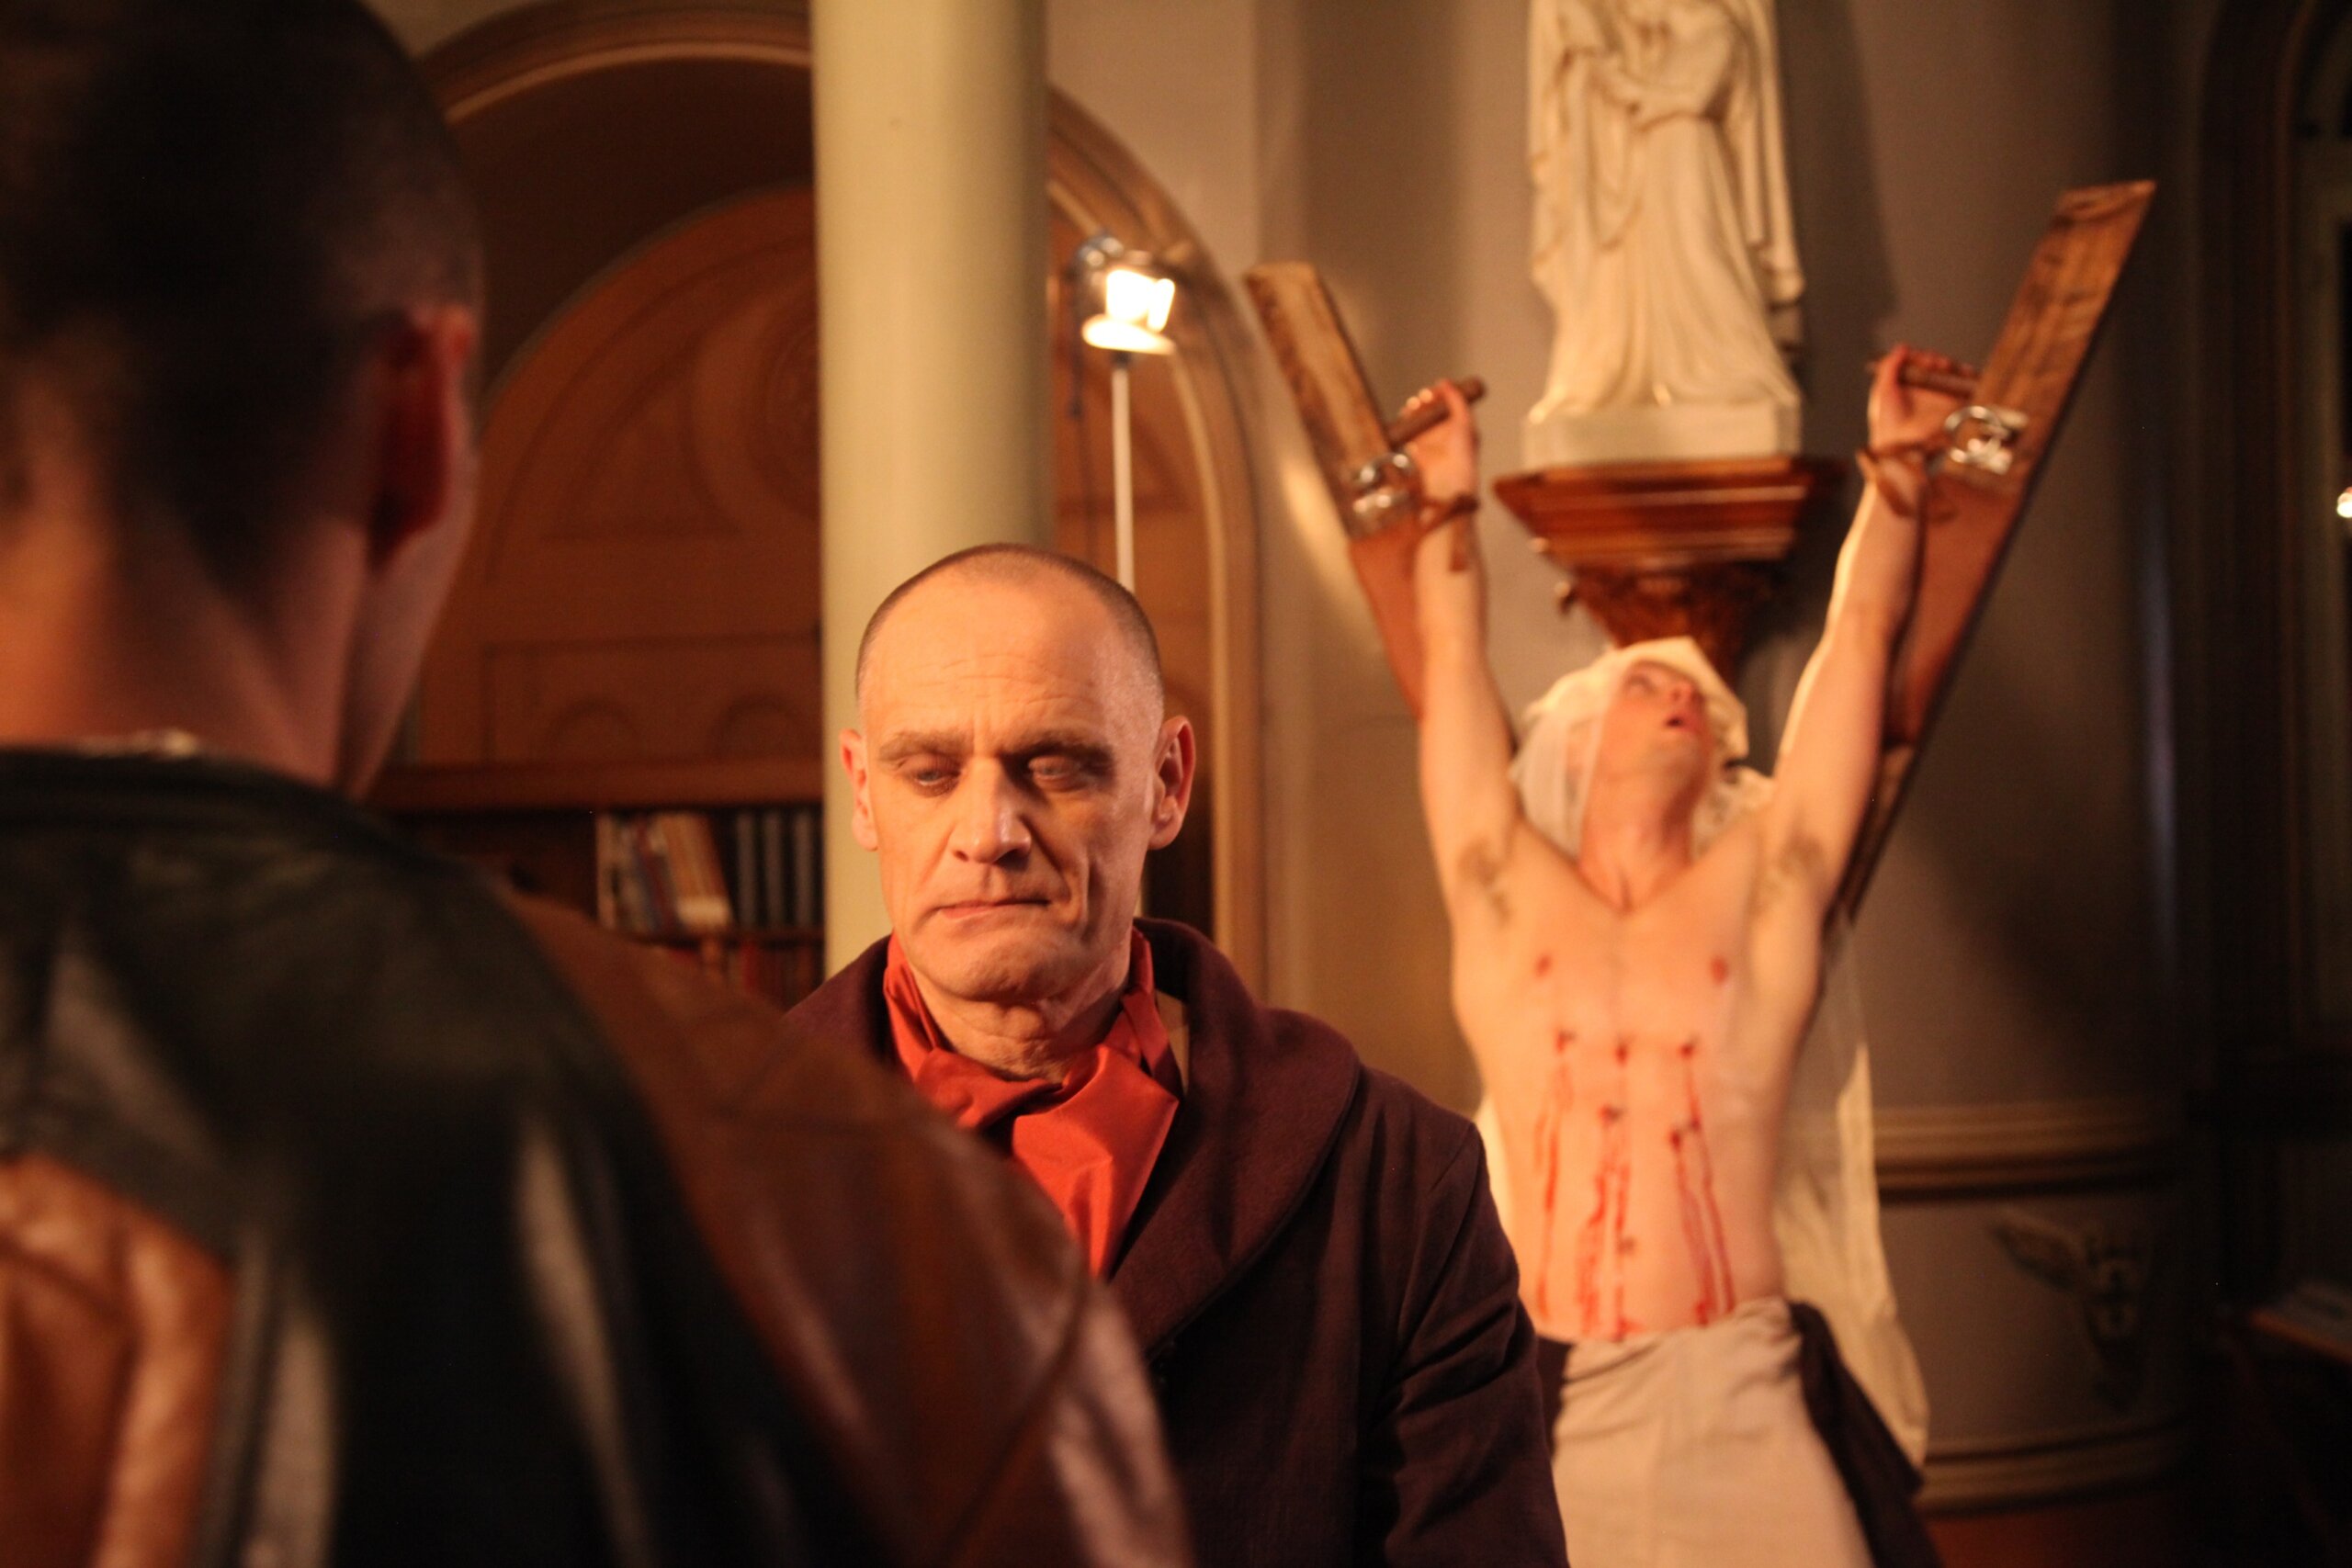 Bruce LaBruce's Saint-Narcisse scene with priest and monk